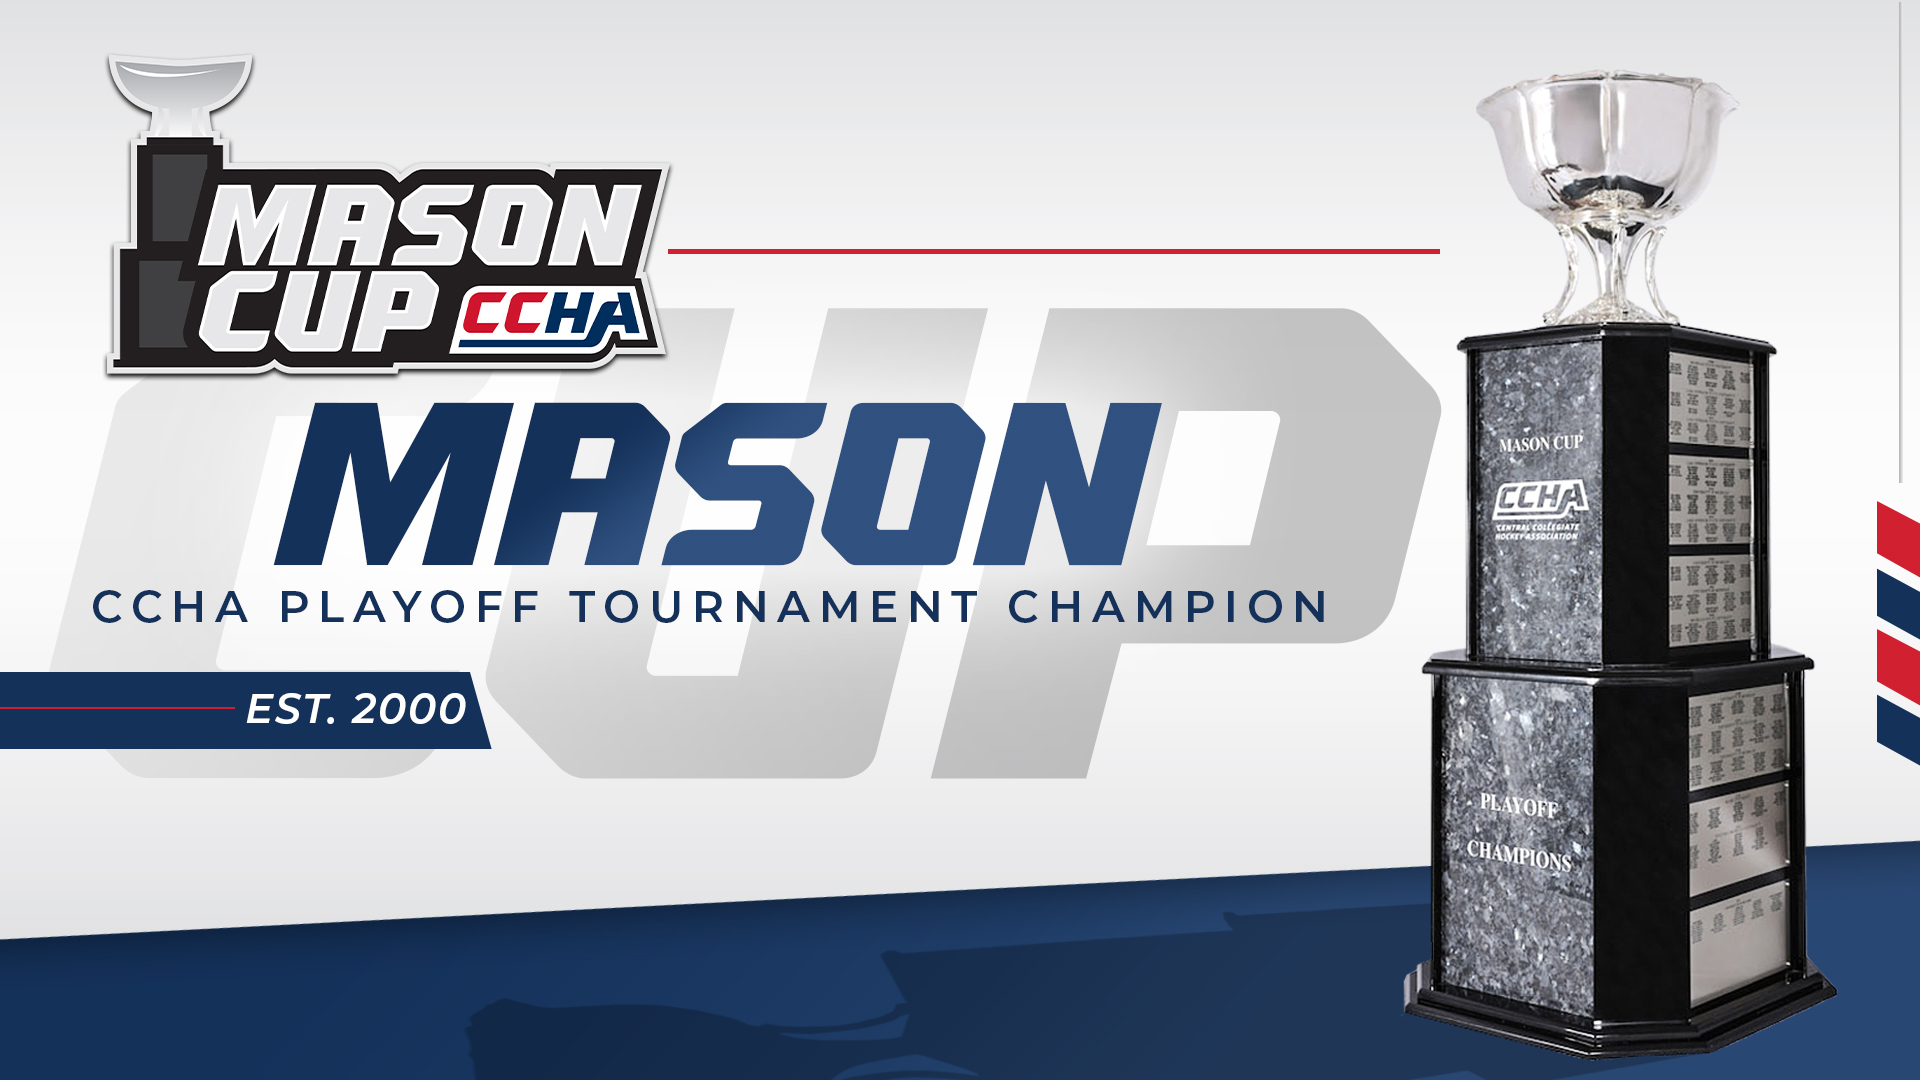 Famed Mason Cup to be Awarded to CCHA Playoff Champion 